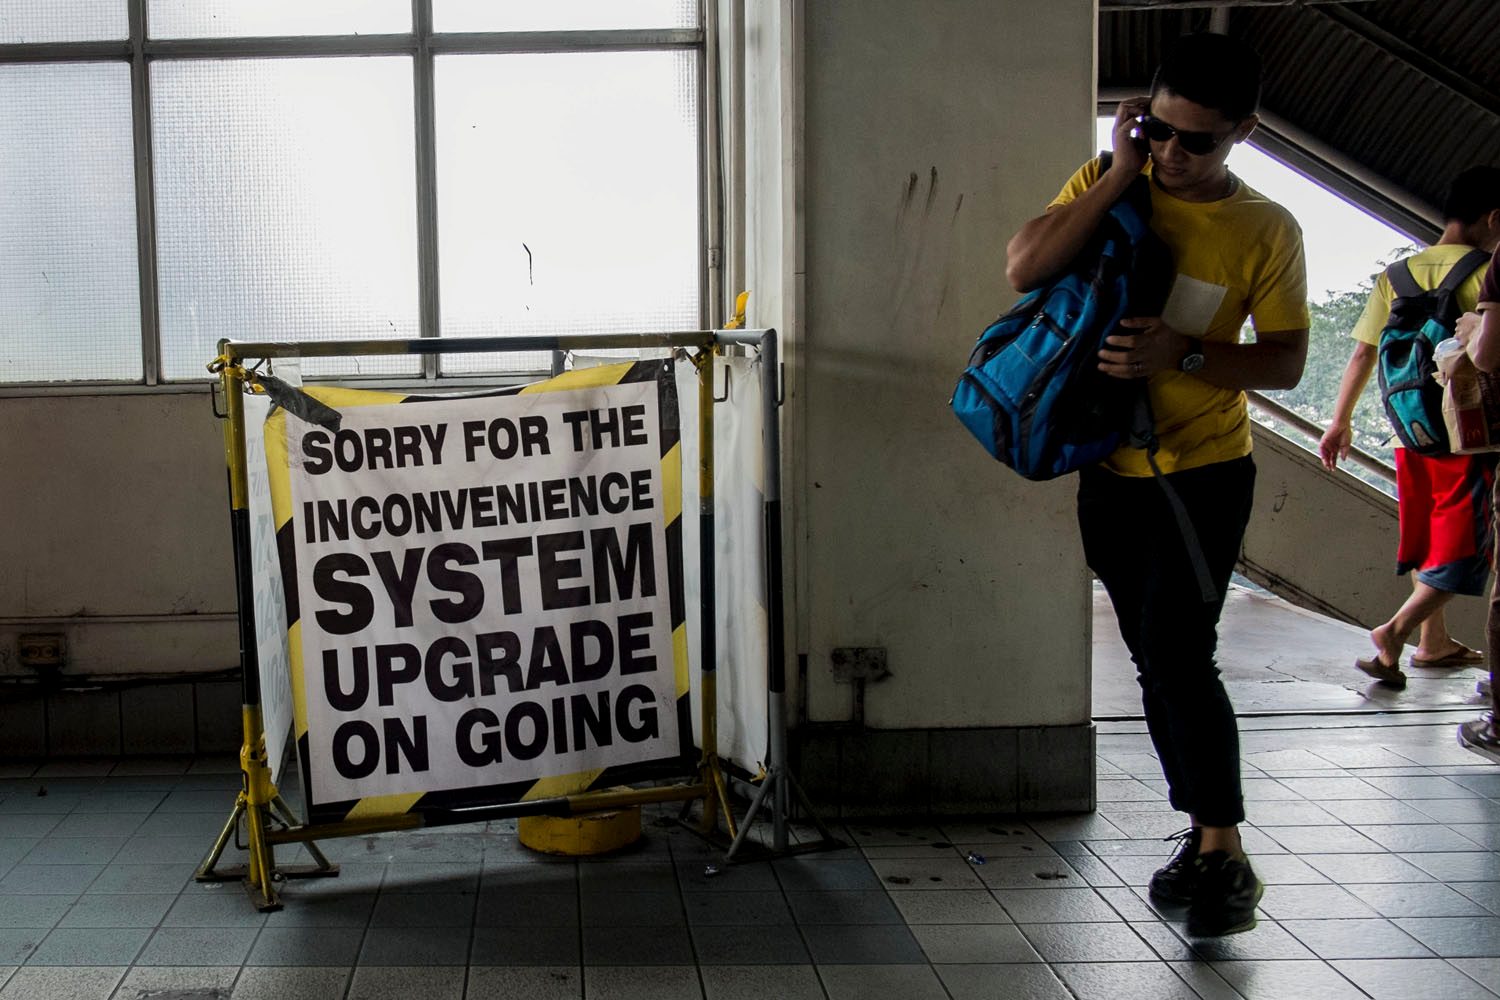 MRT WOES. From January 1 to November 17 2017, there have been 475 MRT3 problems already recorded – an average of 10.33 a week, or more than once a day on some days. Photo by Mark Z. Saludes/Rappler 